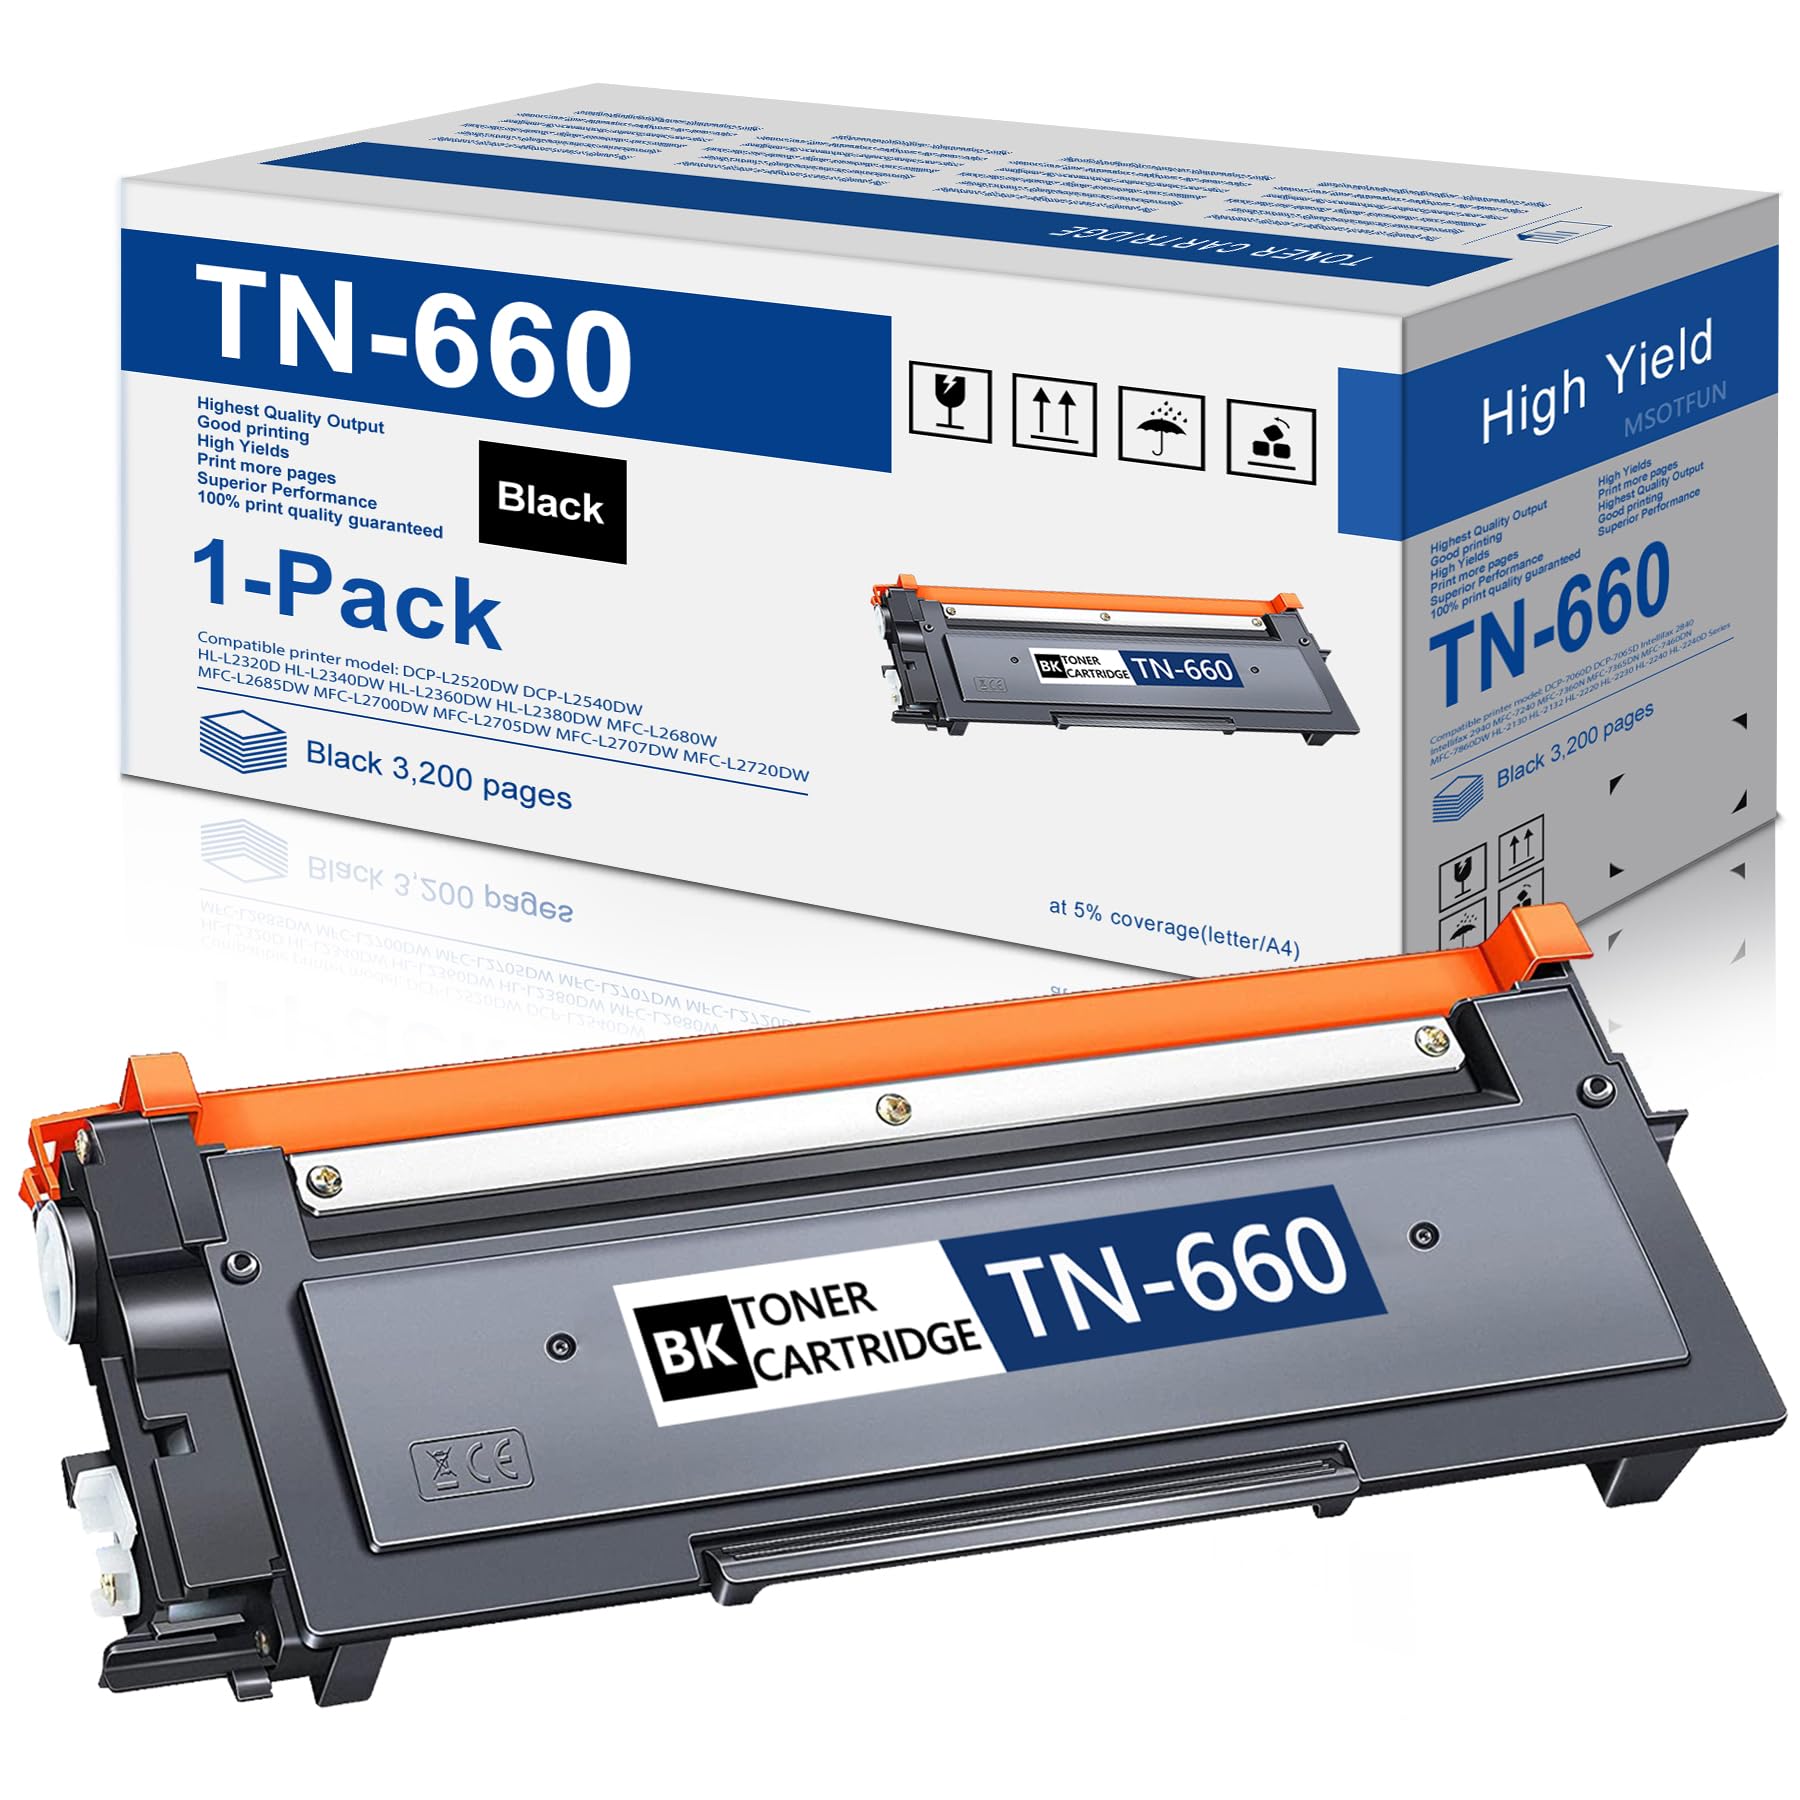 TN-660 TN 660 1 Pack Replacement for Brother High Yield TN660 Toner Cartridge, Black, Page Yield Up to 3,200 Pages, HL-L2300D HL-L2305W HL-L2340DW HL-L2360DW HL-L2320D MFC--L2740DW DCP-L2540DW Printer